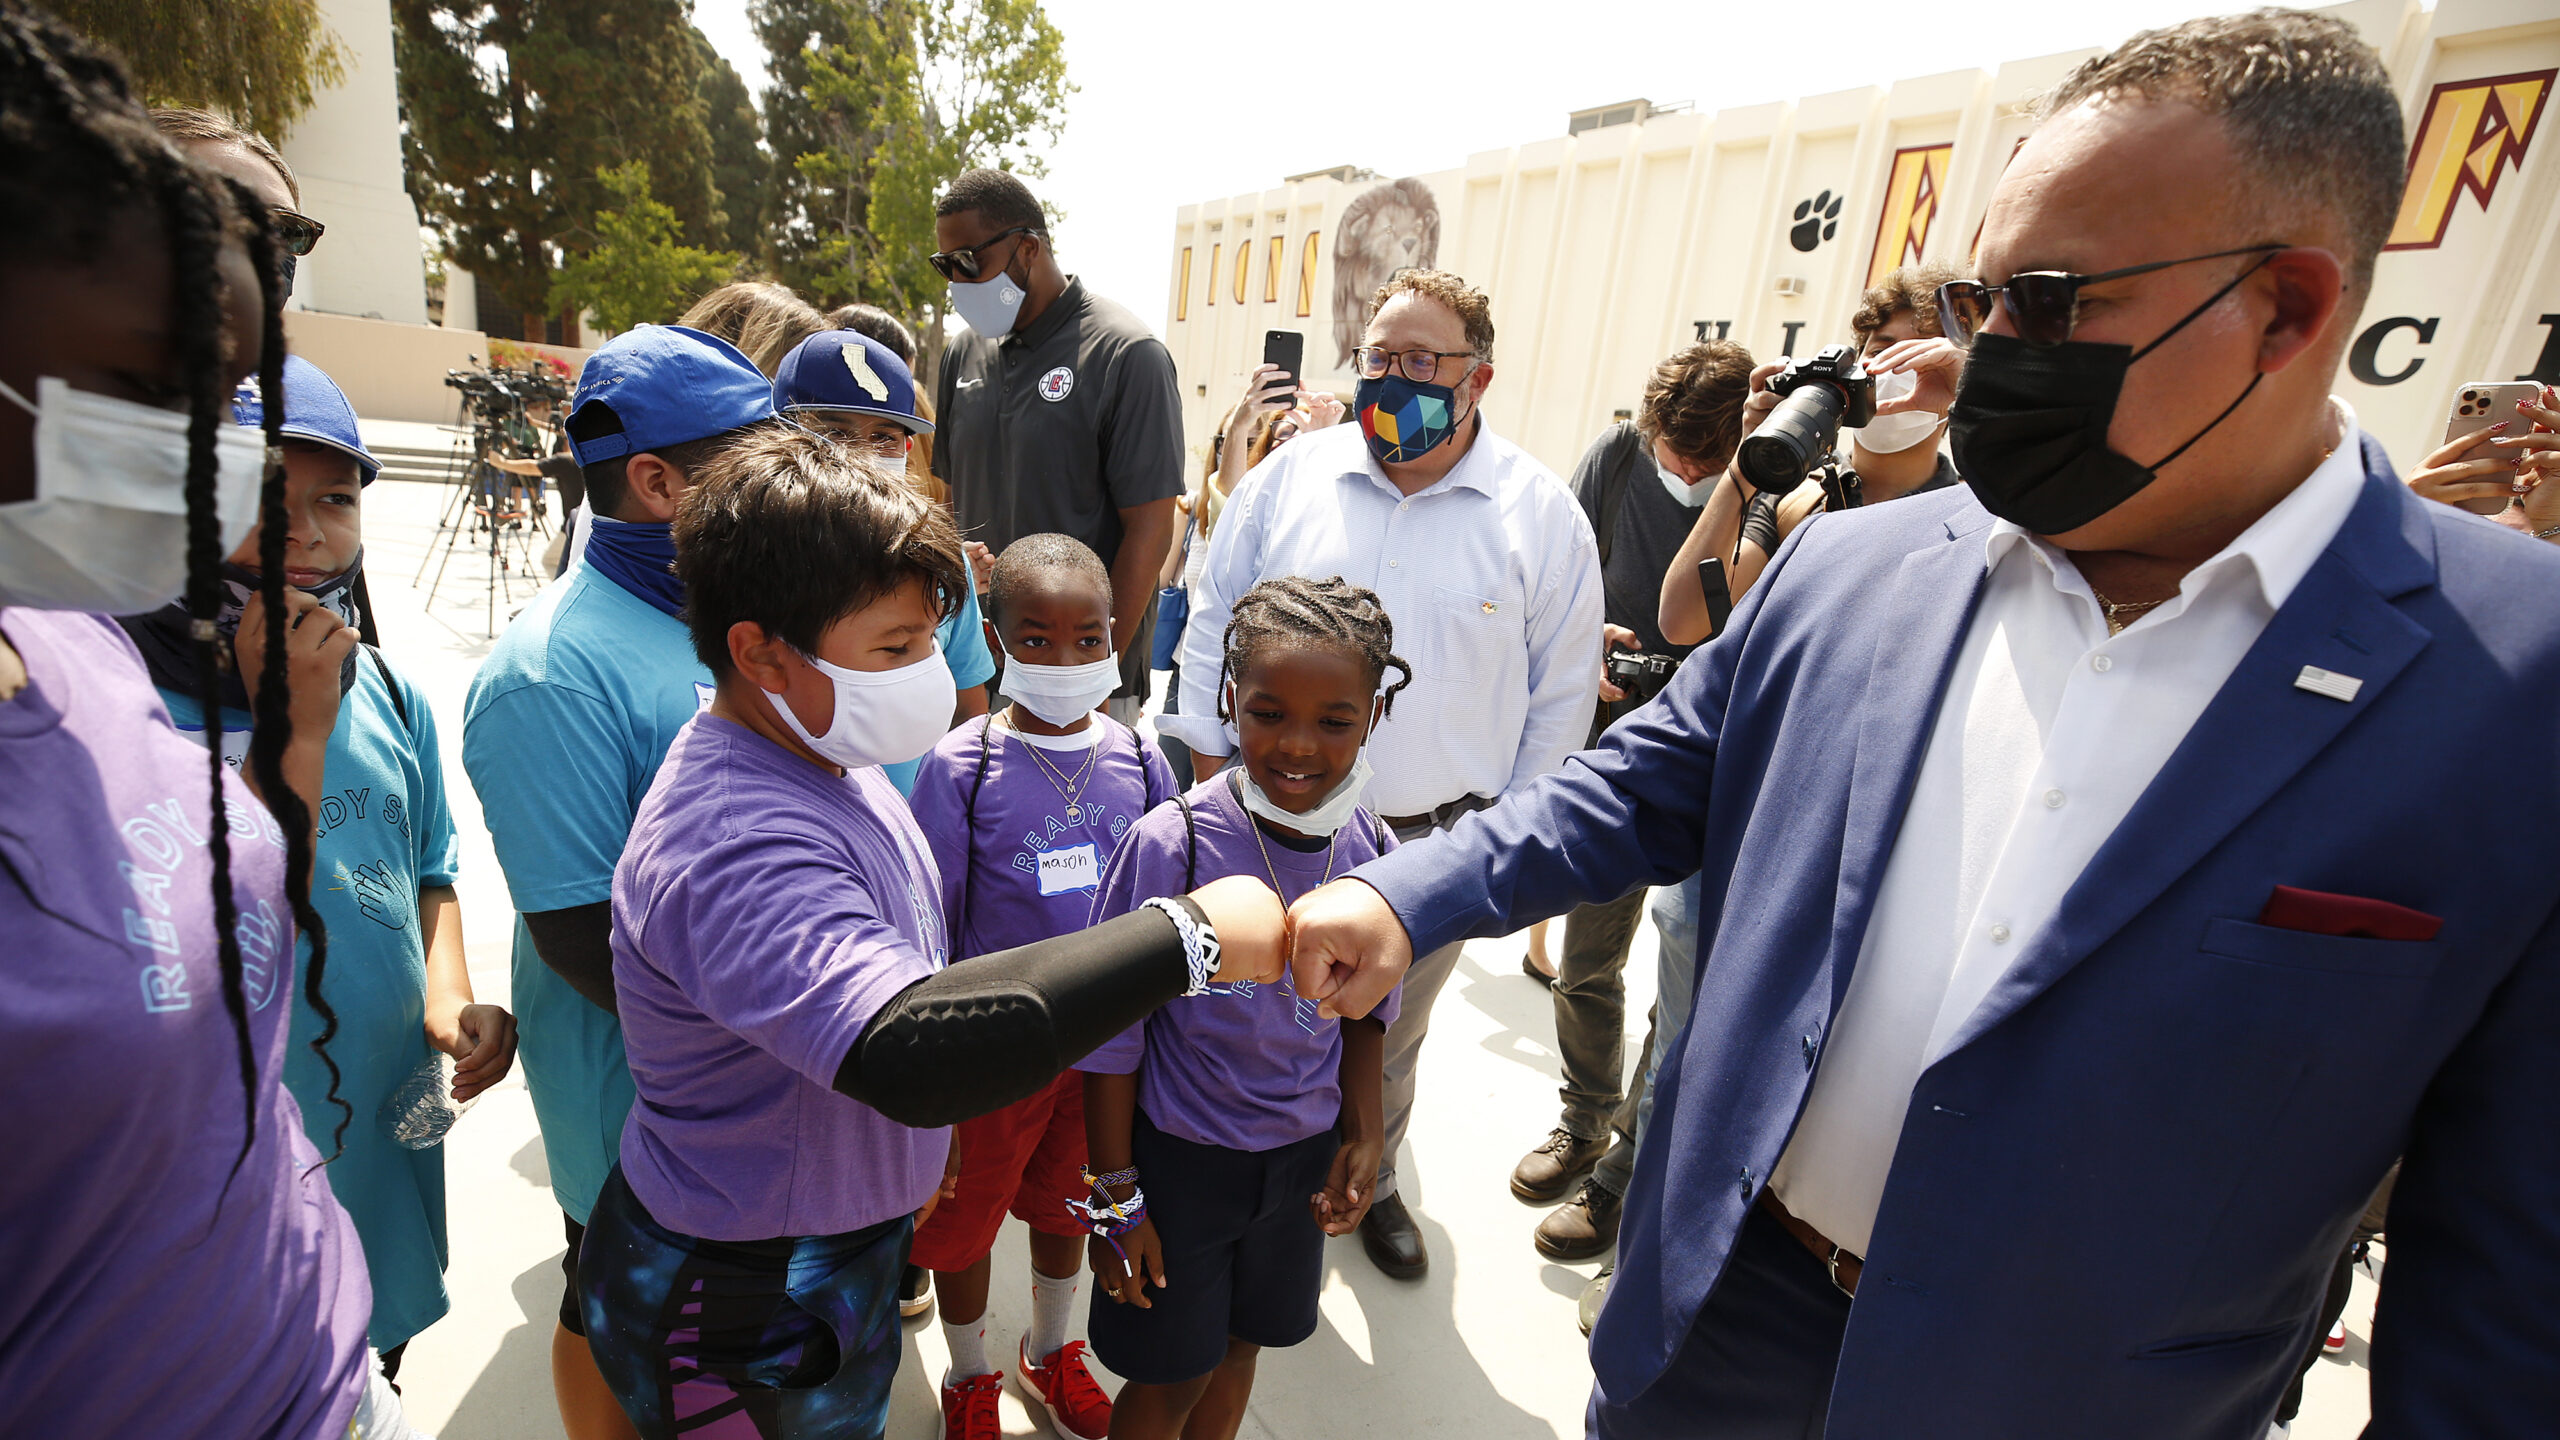 A man in a face mask fist bumps a child who is also wearing a face mask.